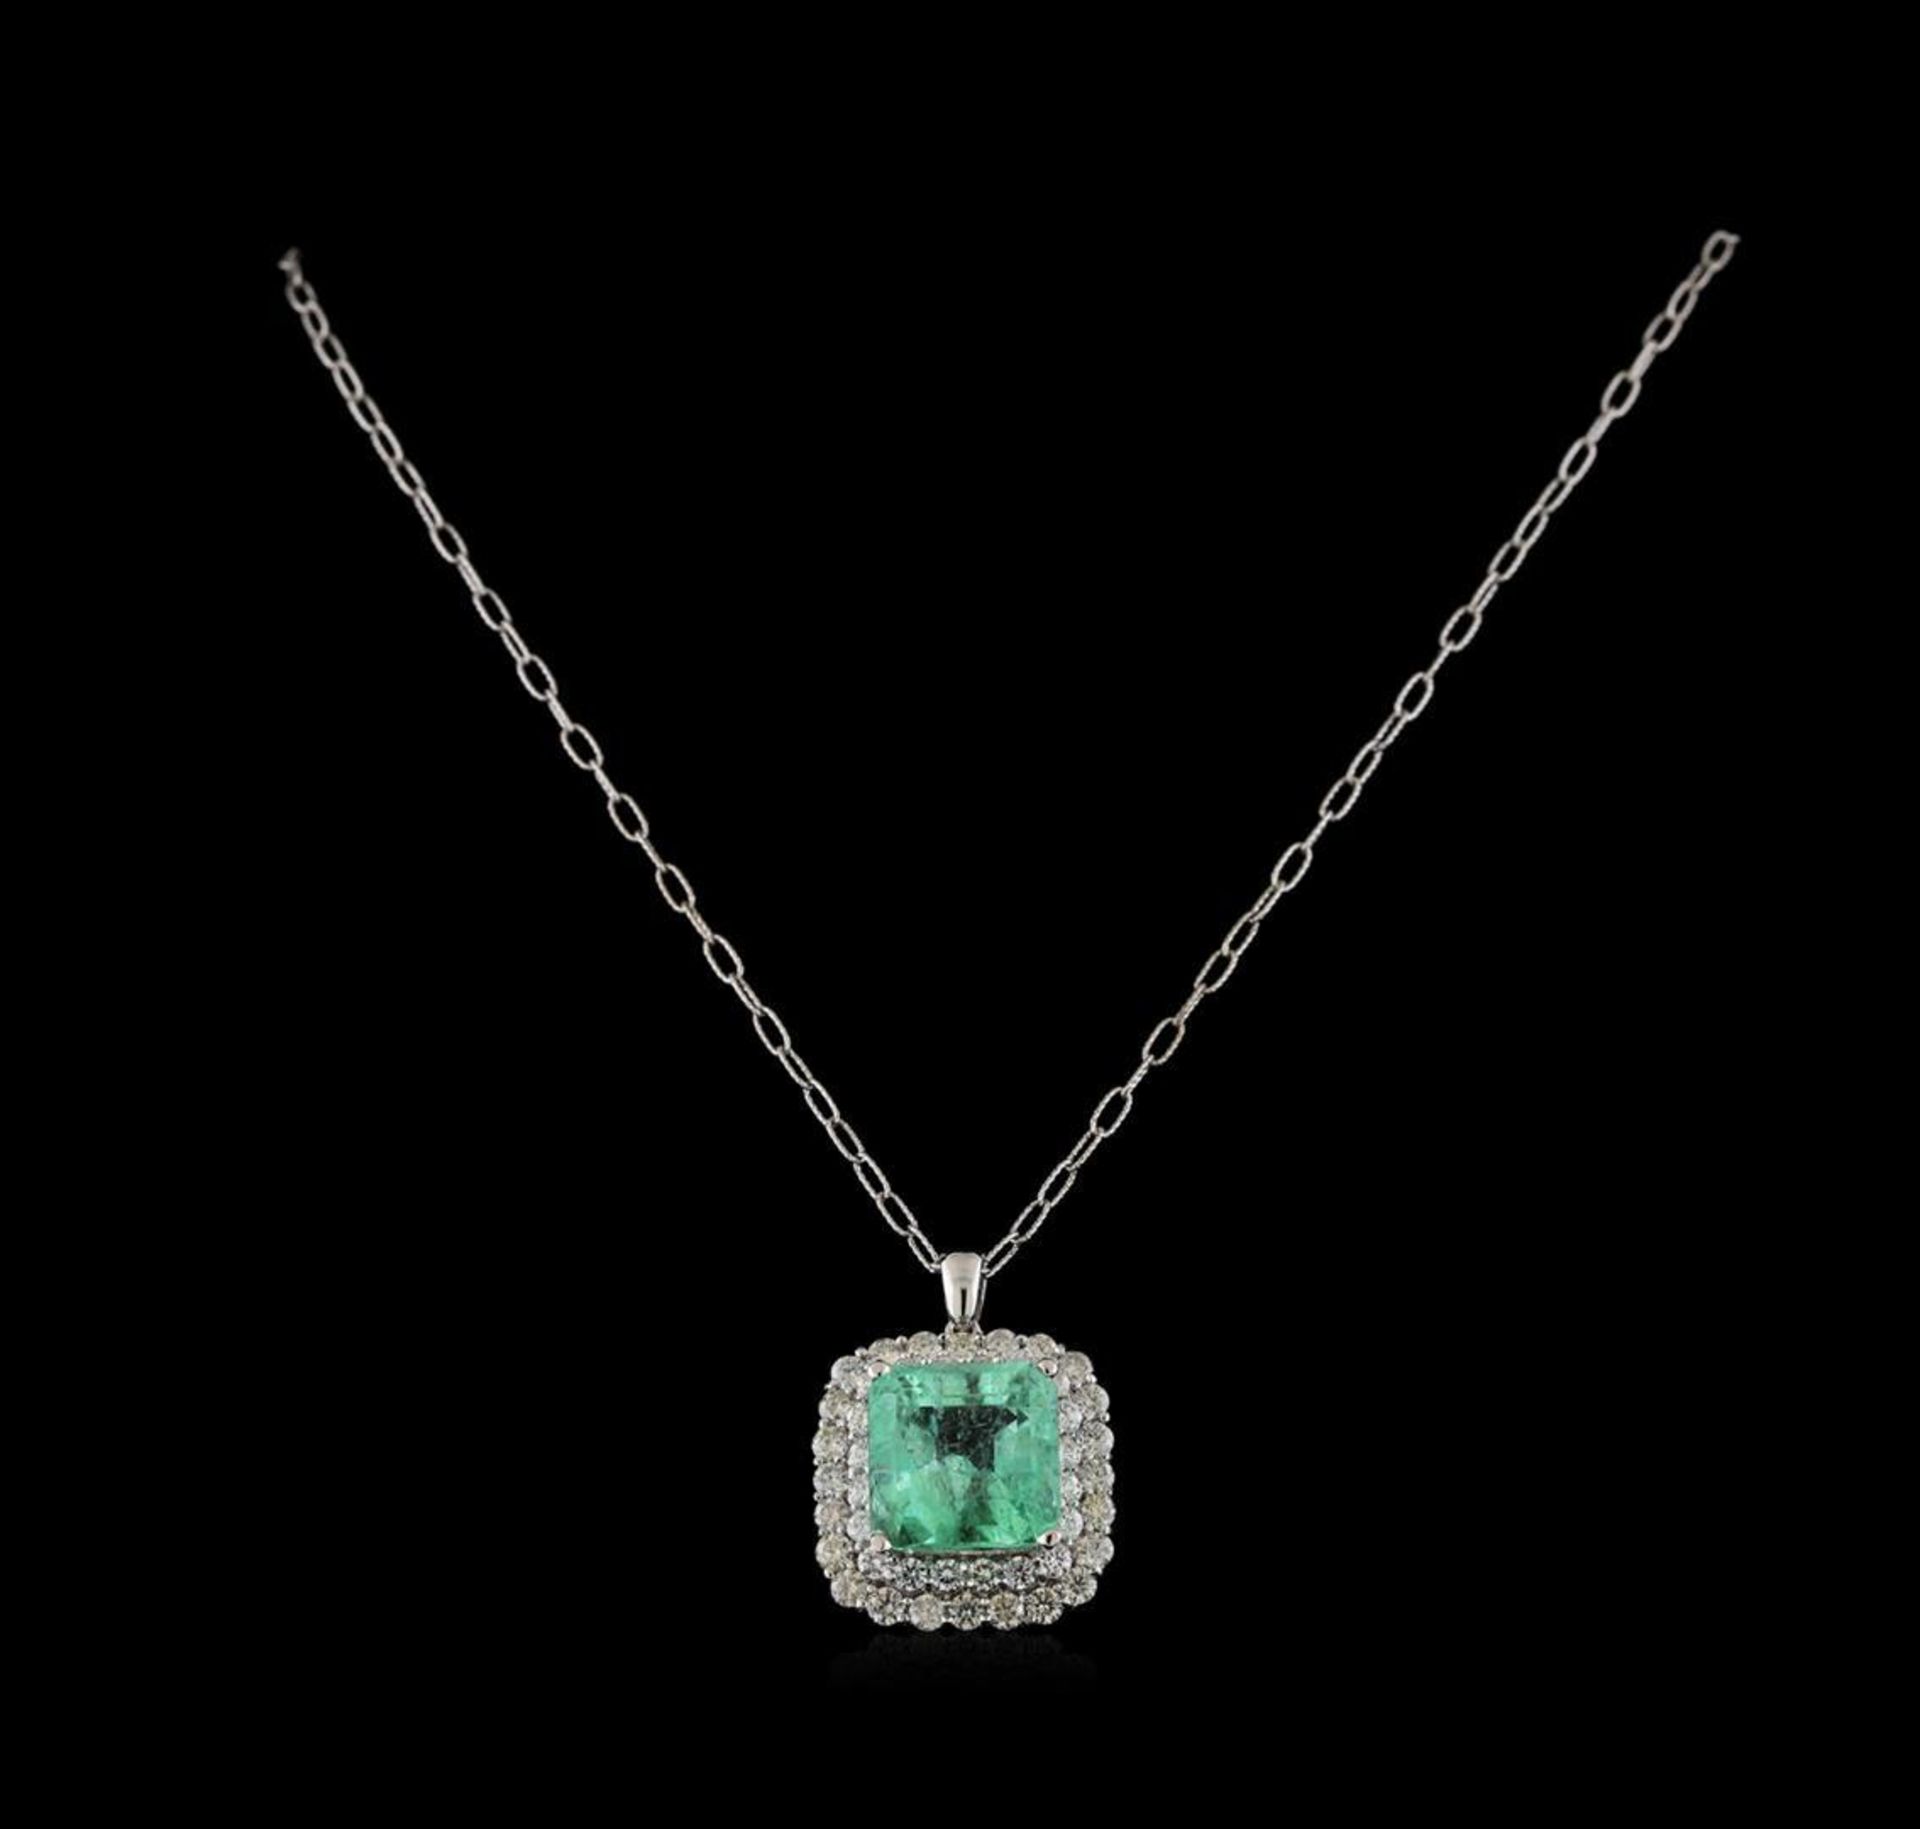 18.09 ctw Emerald and Diamond Pendant With Chain - 14KT White Gold - Image 3 of 8